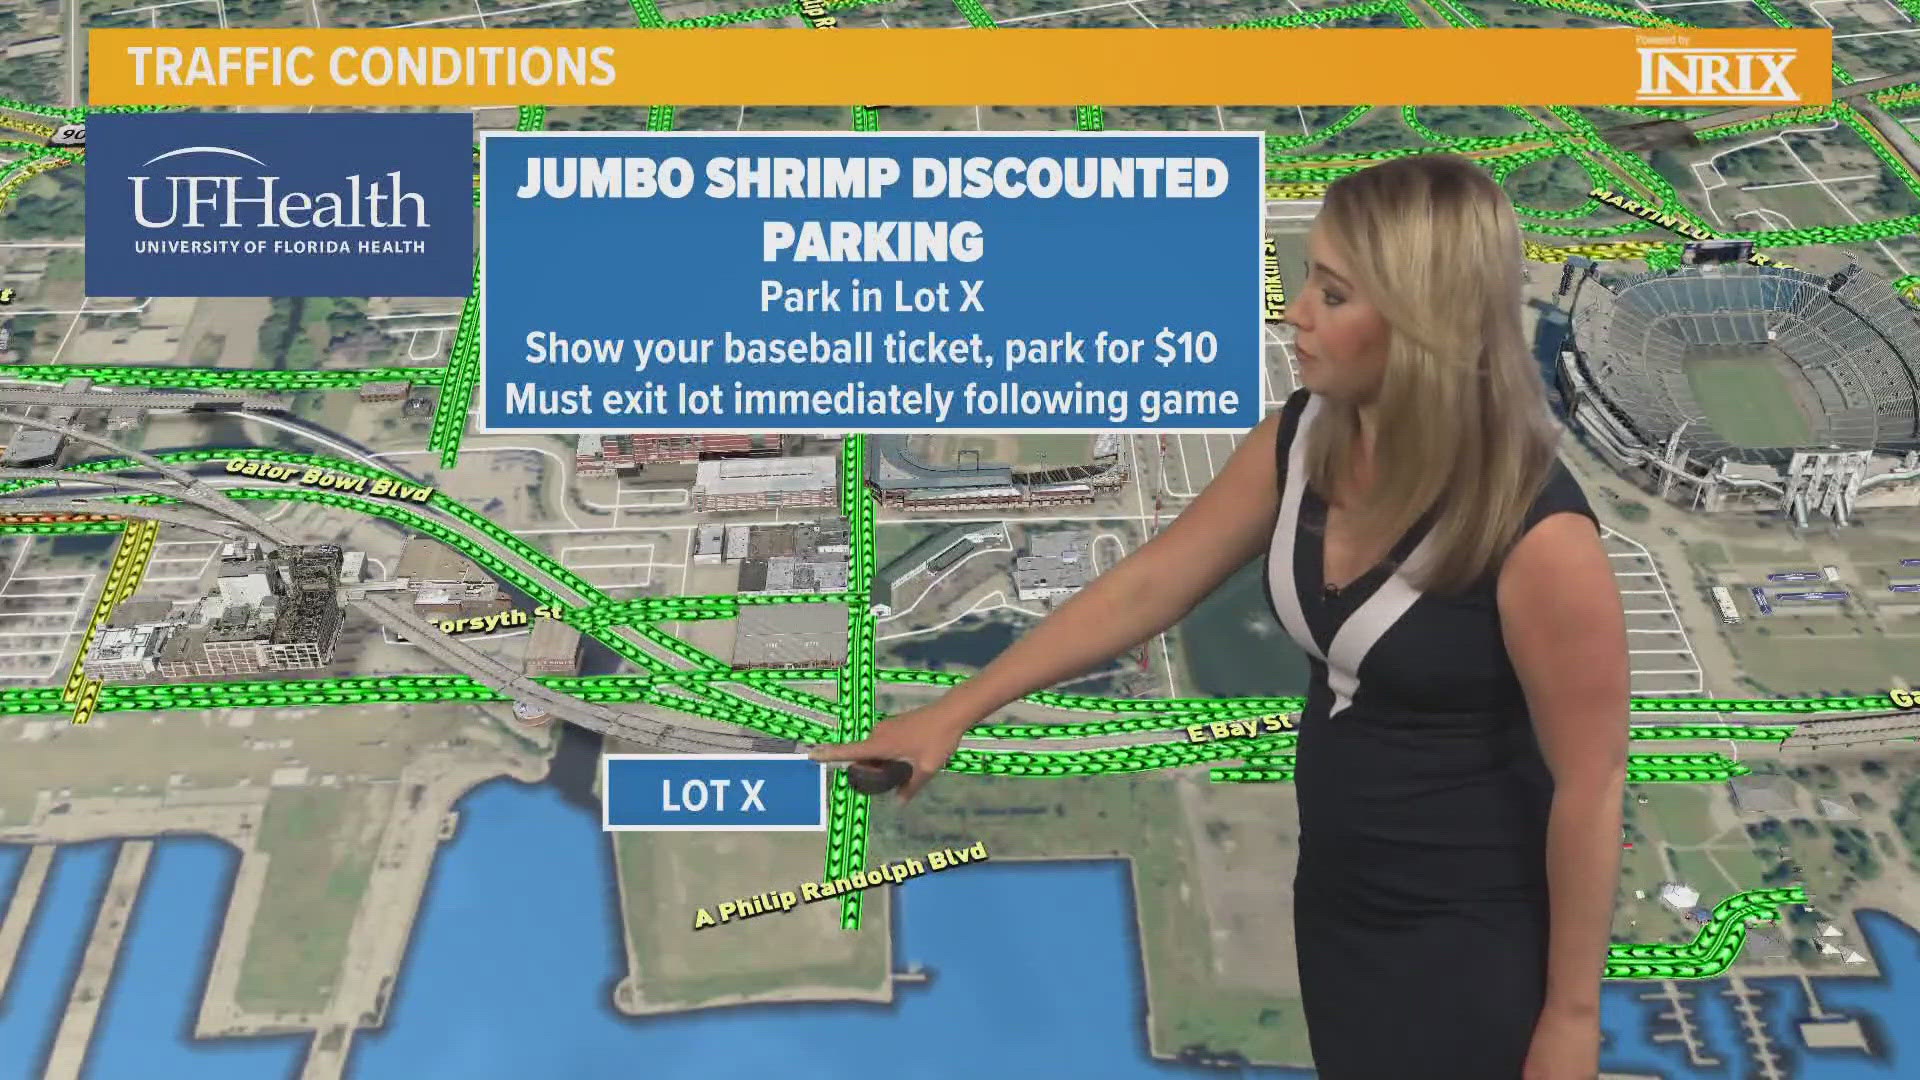 Fans attending the Jumbo Shrimp's home game on Saturday can park in 'Lot X' for a discounted price; they will be required to show their ticket upon entering the lot.